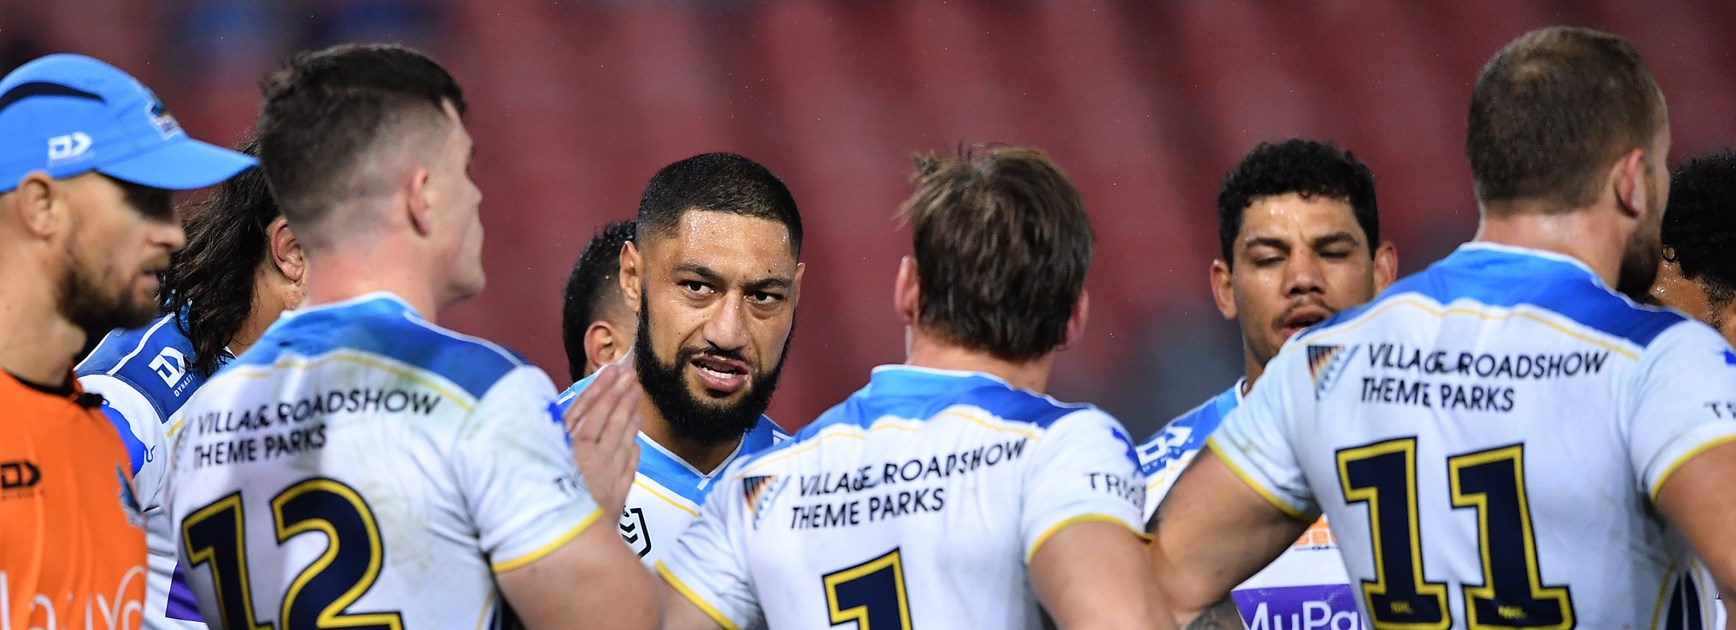 Lee scores five to help Knights down Titans in Newcastle